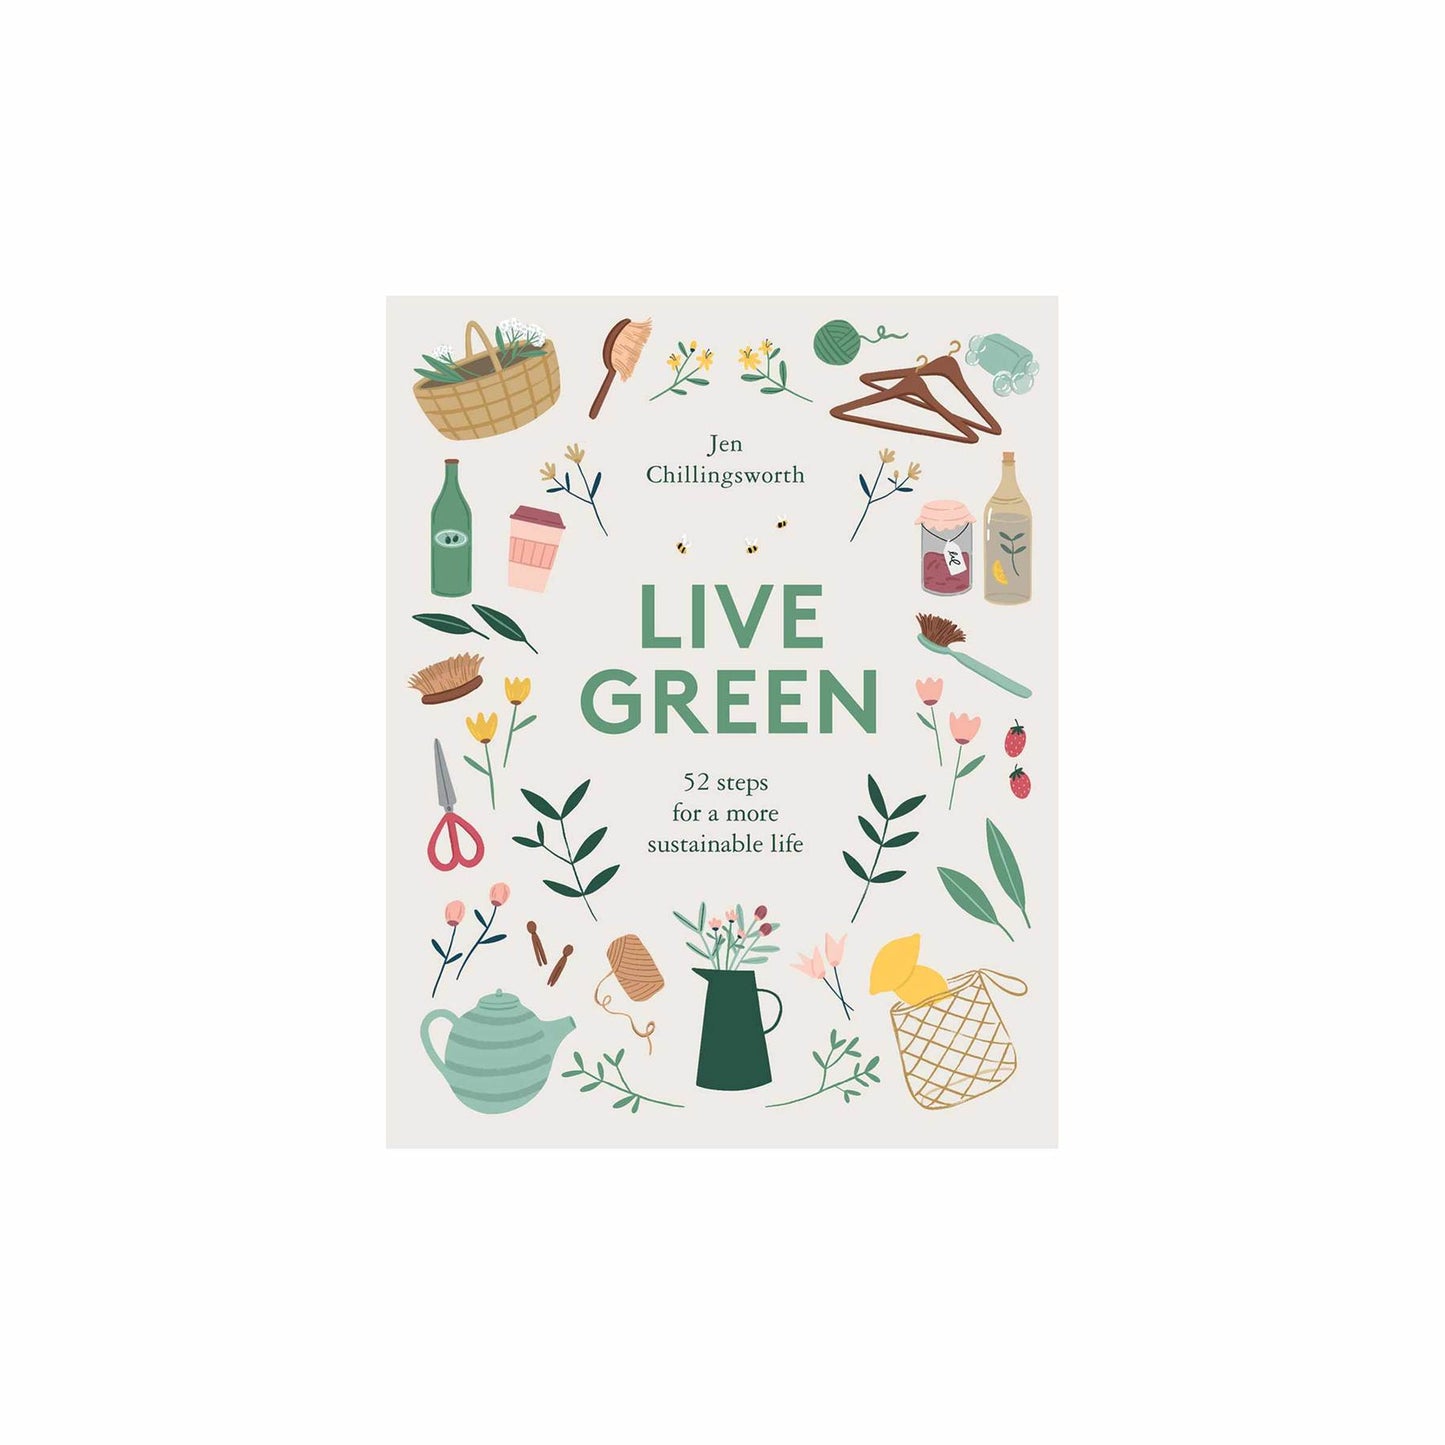 Live Green: 52 Steps for a more sustainable life